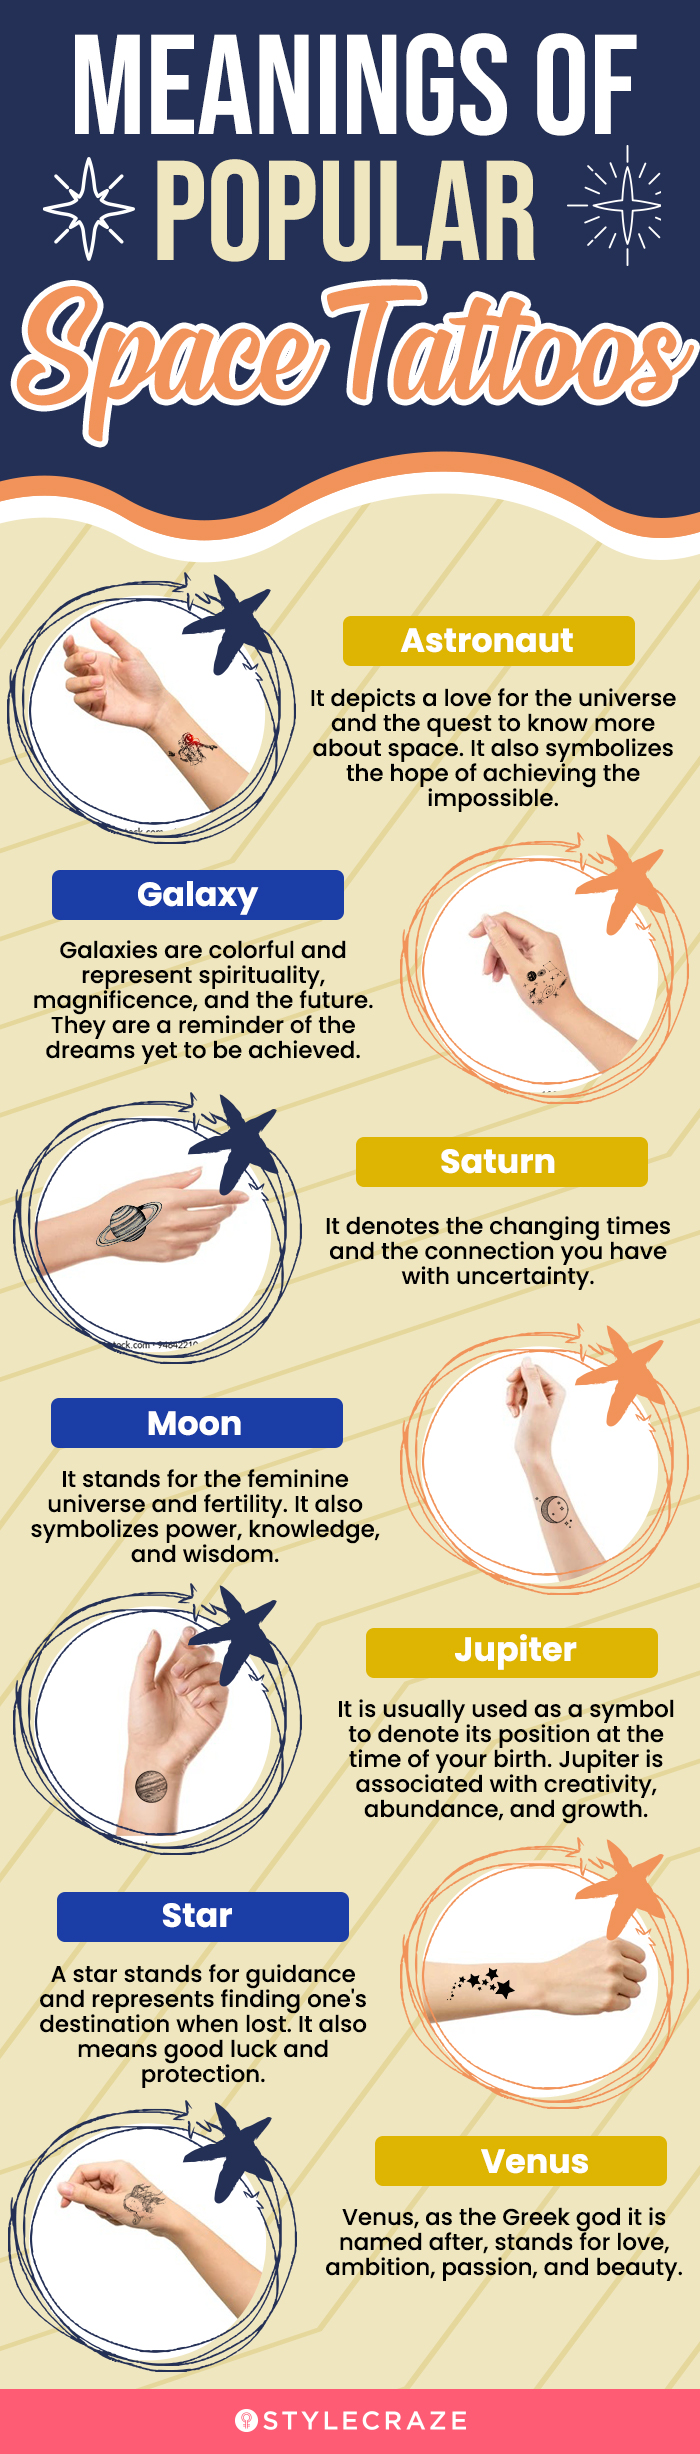 meanings of popular space tattoos (infographic)